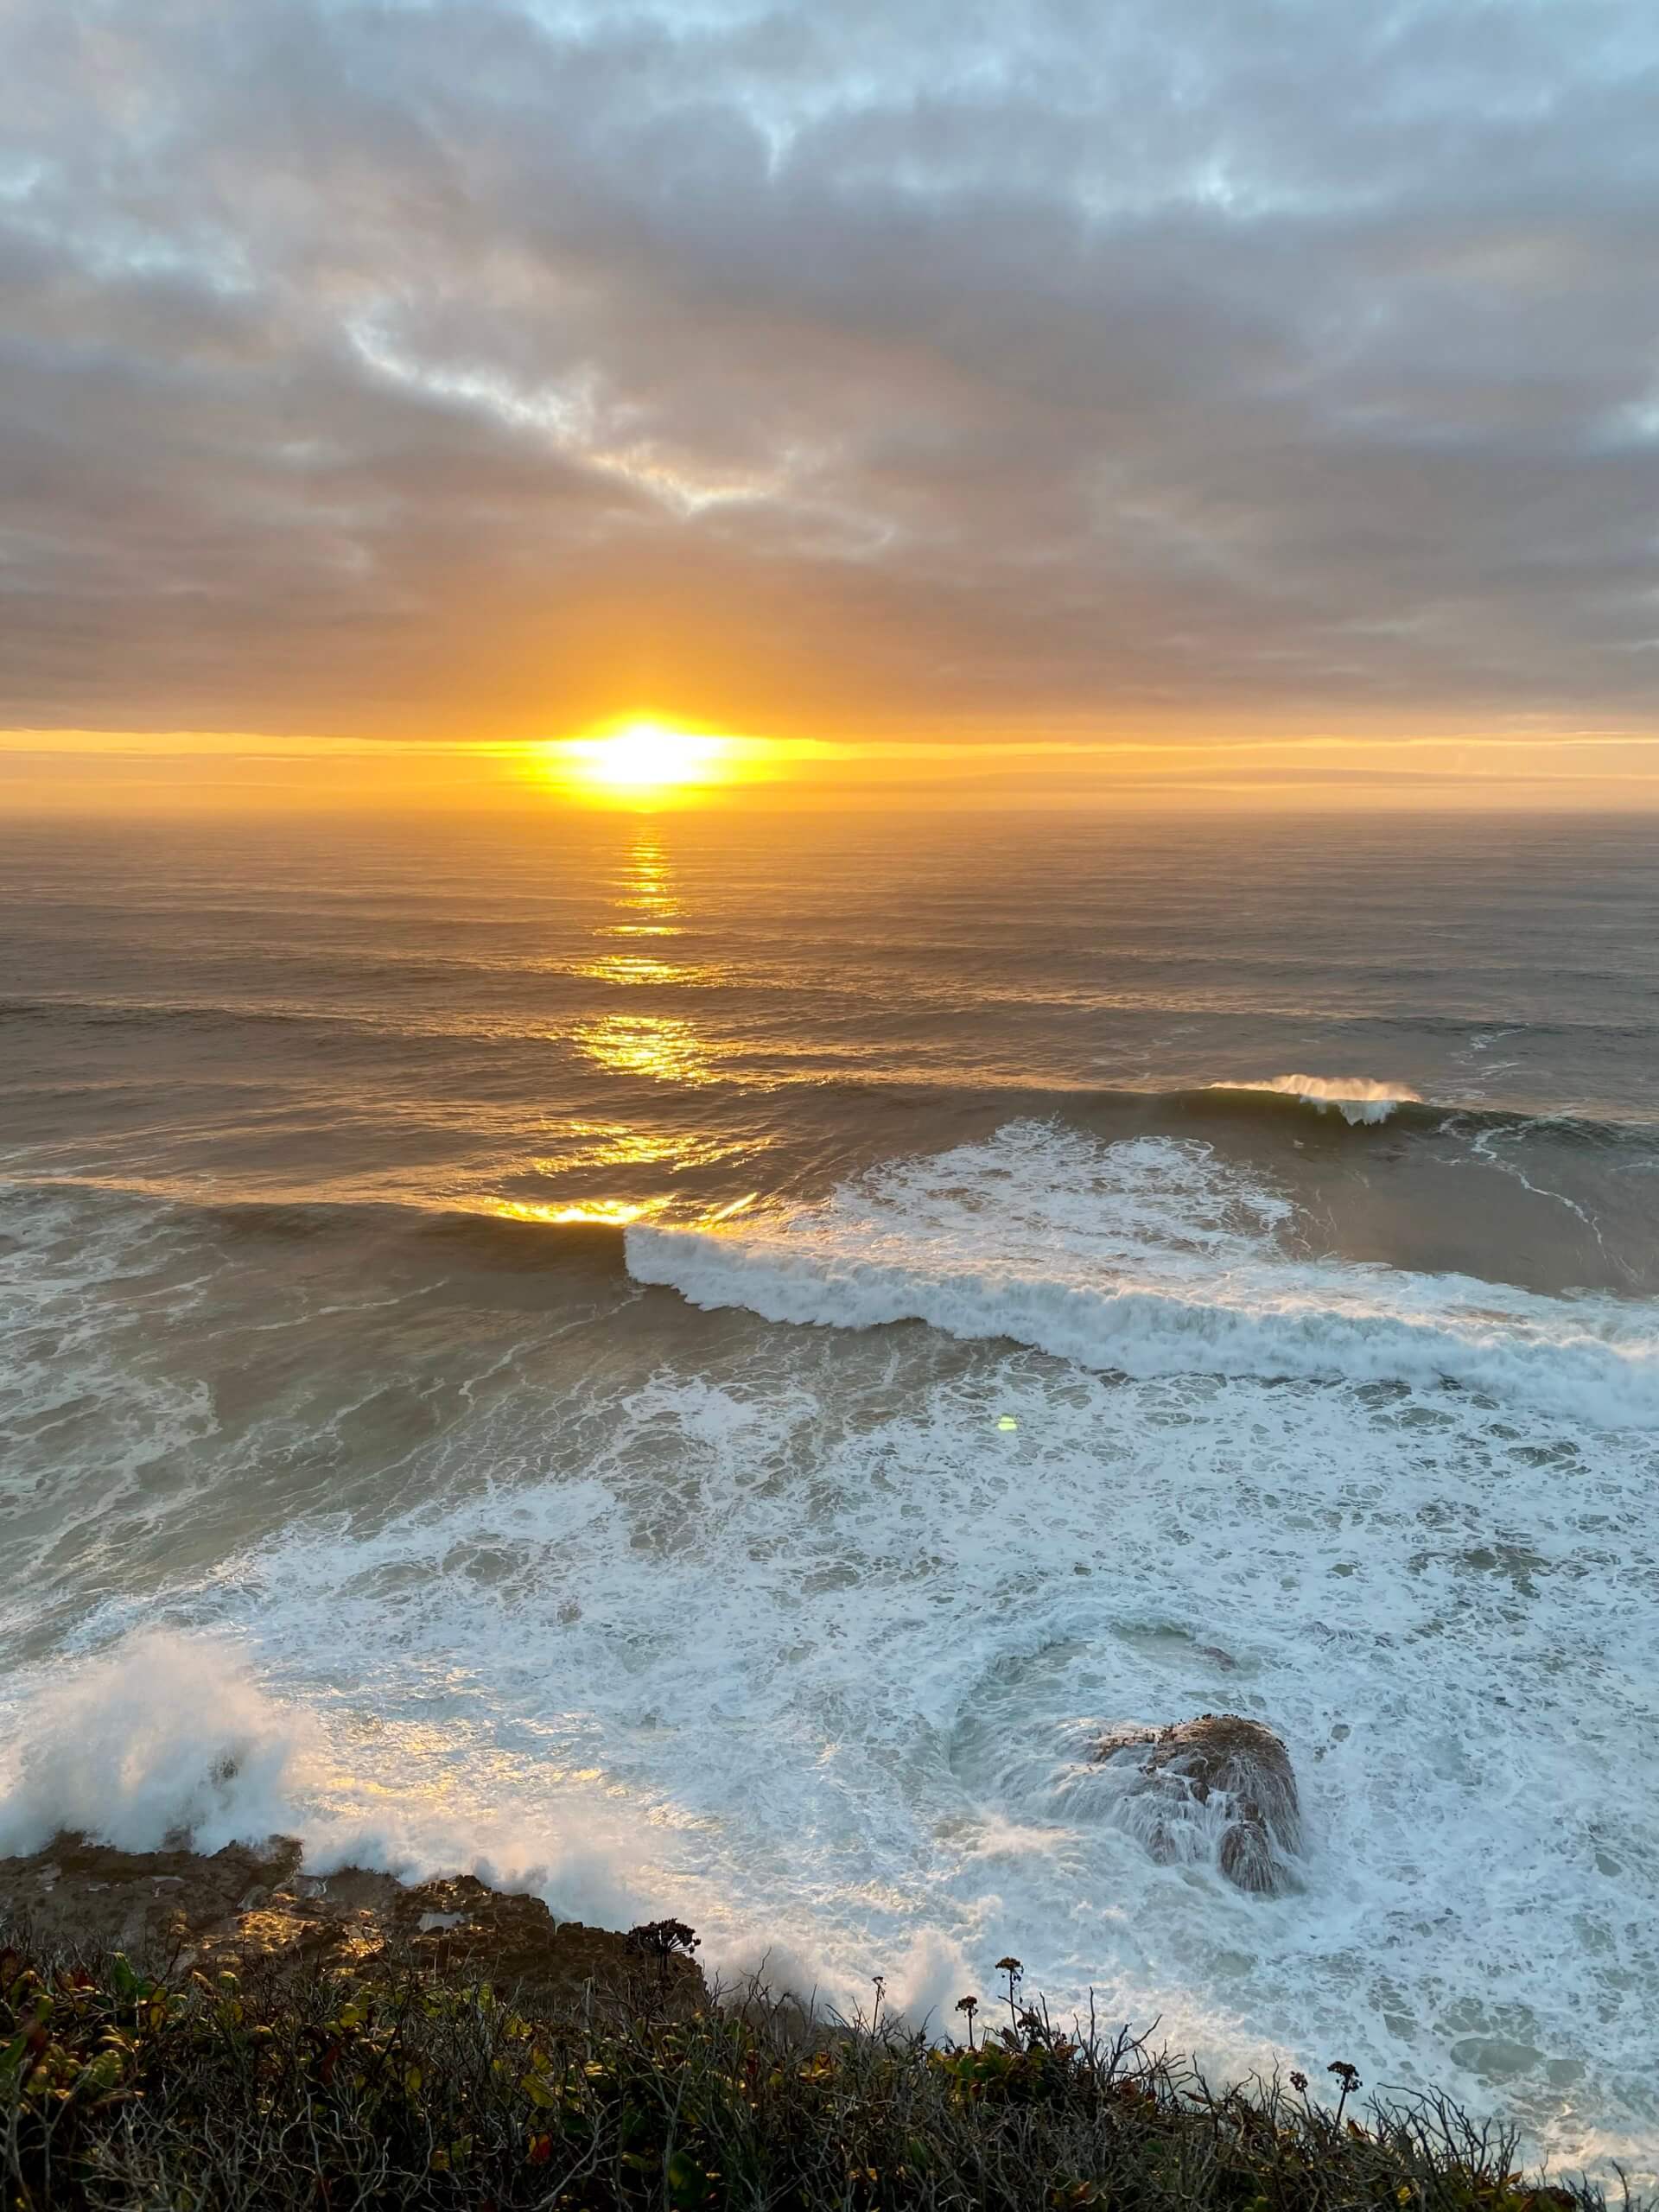 Sunset photo taken near Yachats, Oregon casts a buttery yellow glow over the Pacific Ocean as waves crash onto rocks and create a foamy white suds.